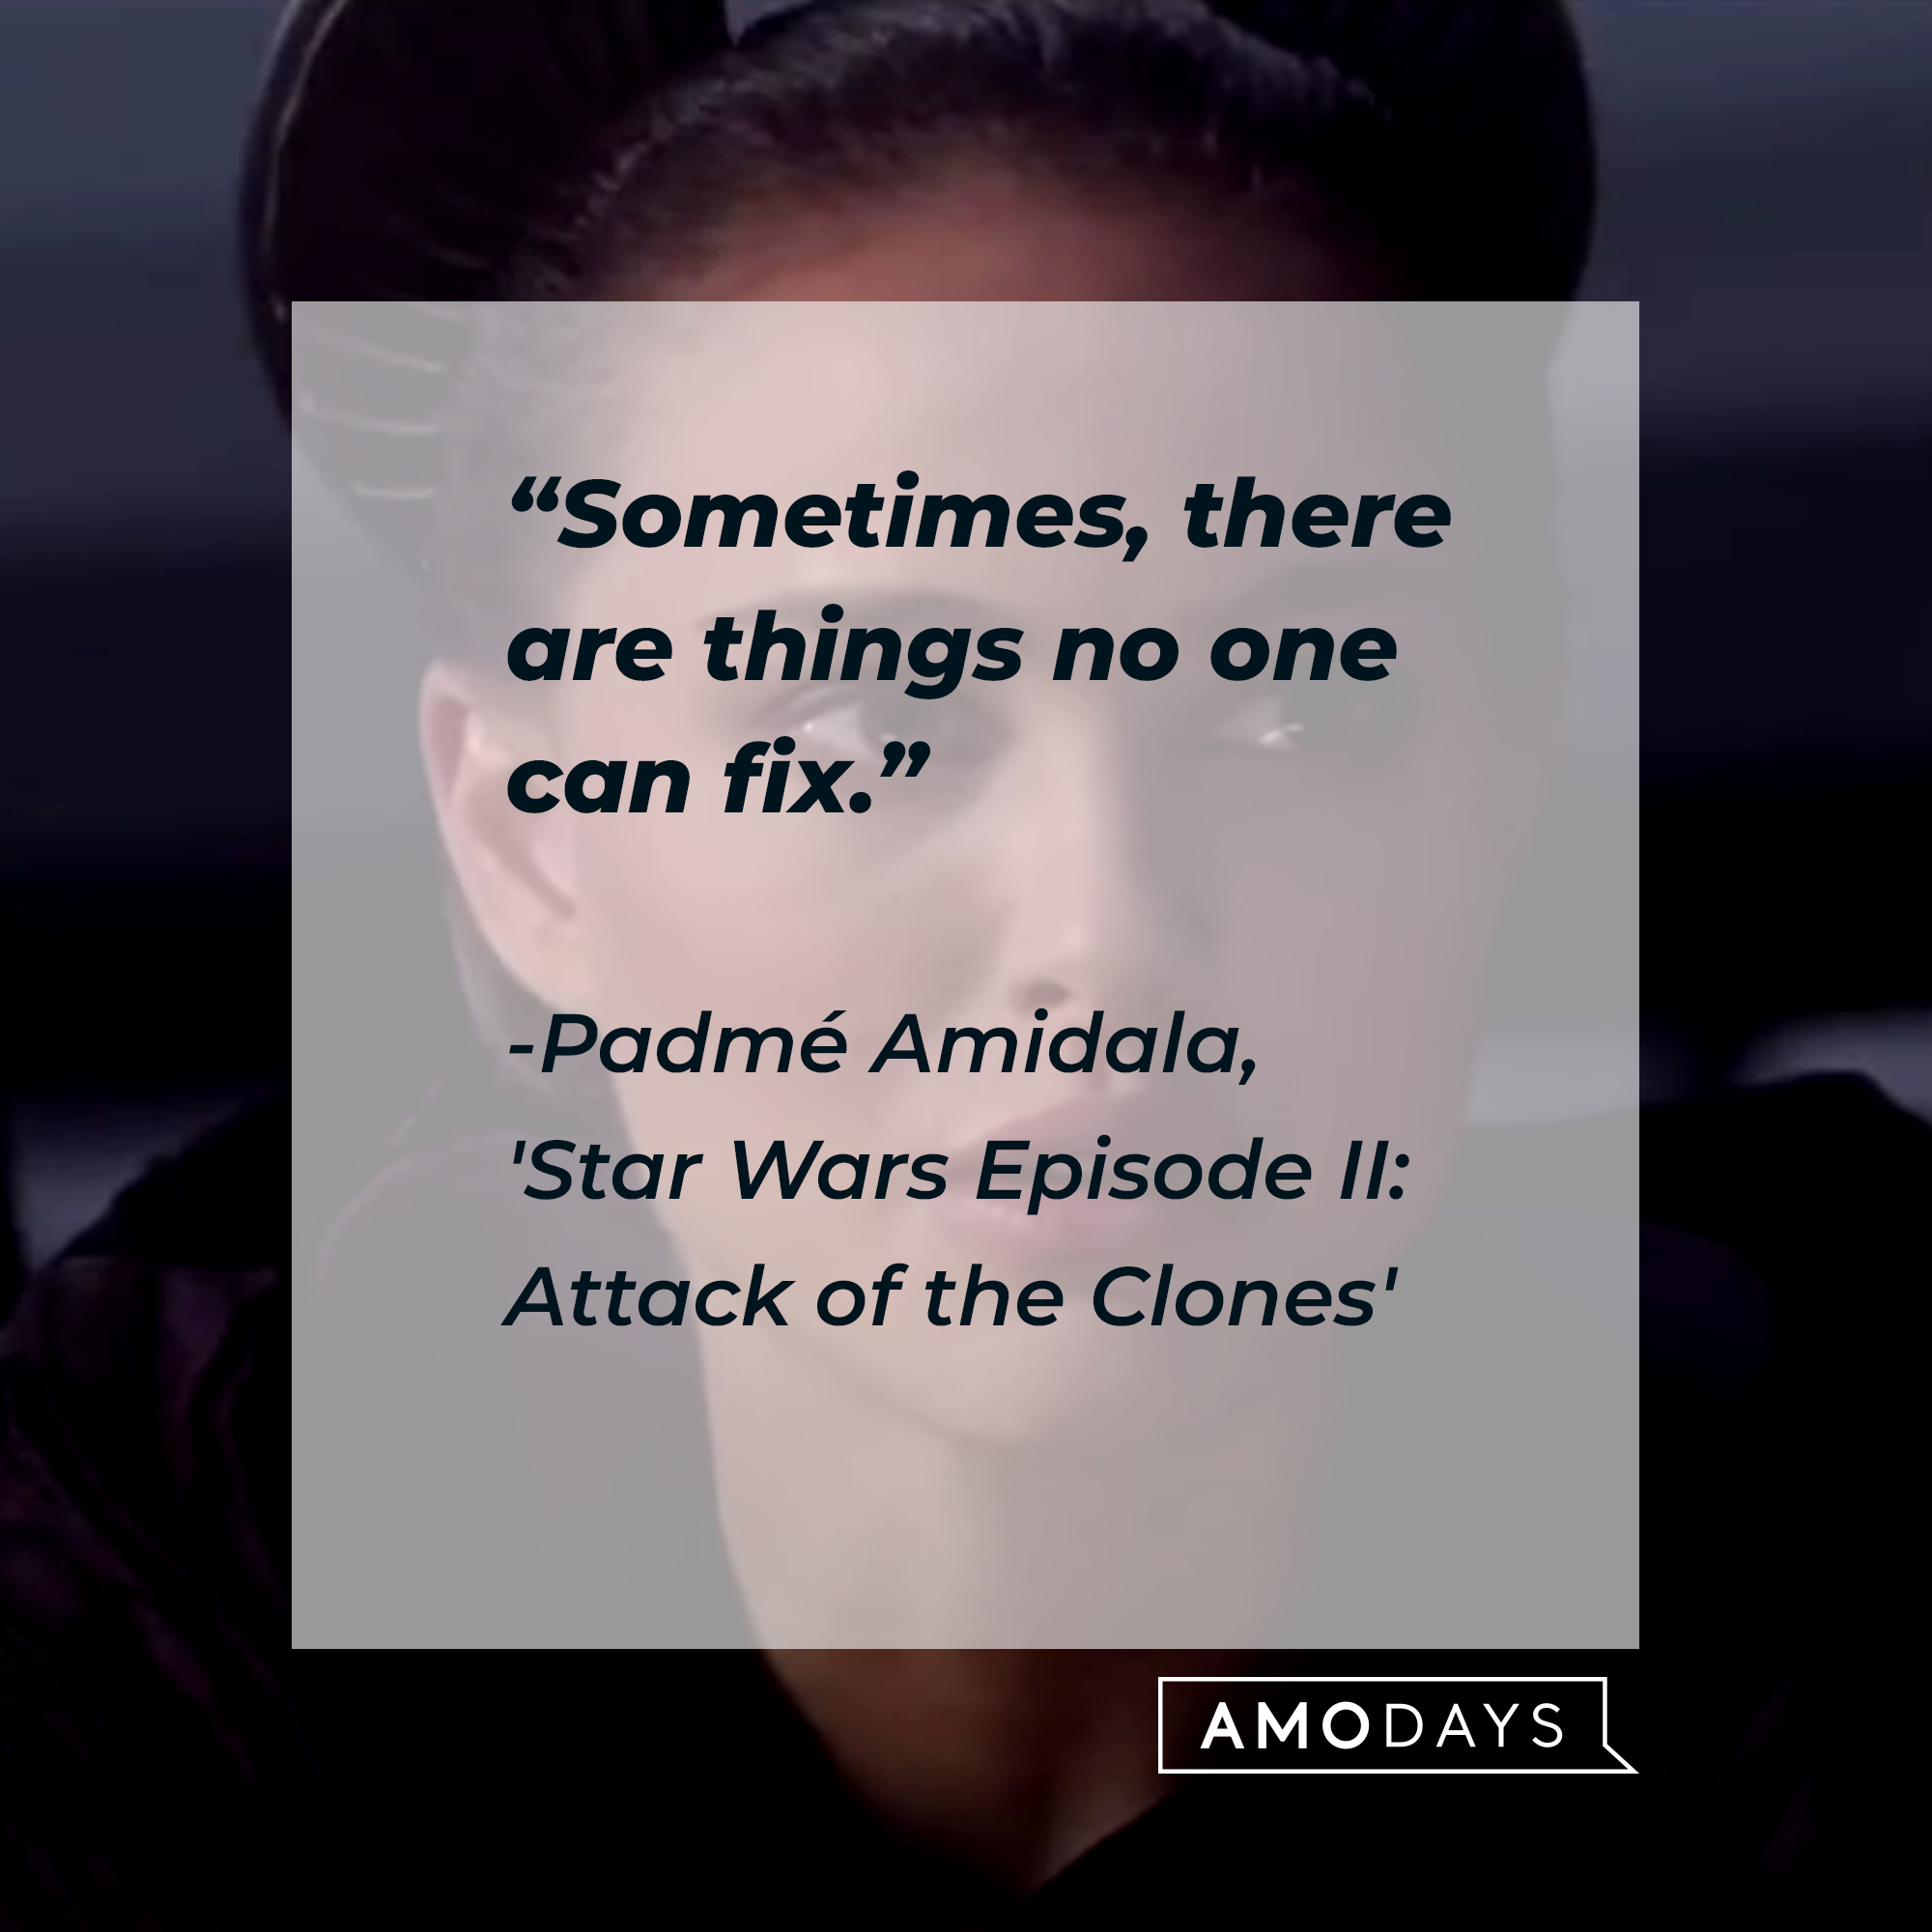 Padmé Amidala with her quote: "Sometimes, there are things no one can fix." | Source: Facebook.com/StarWars